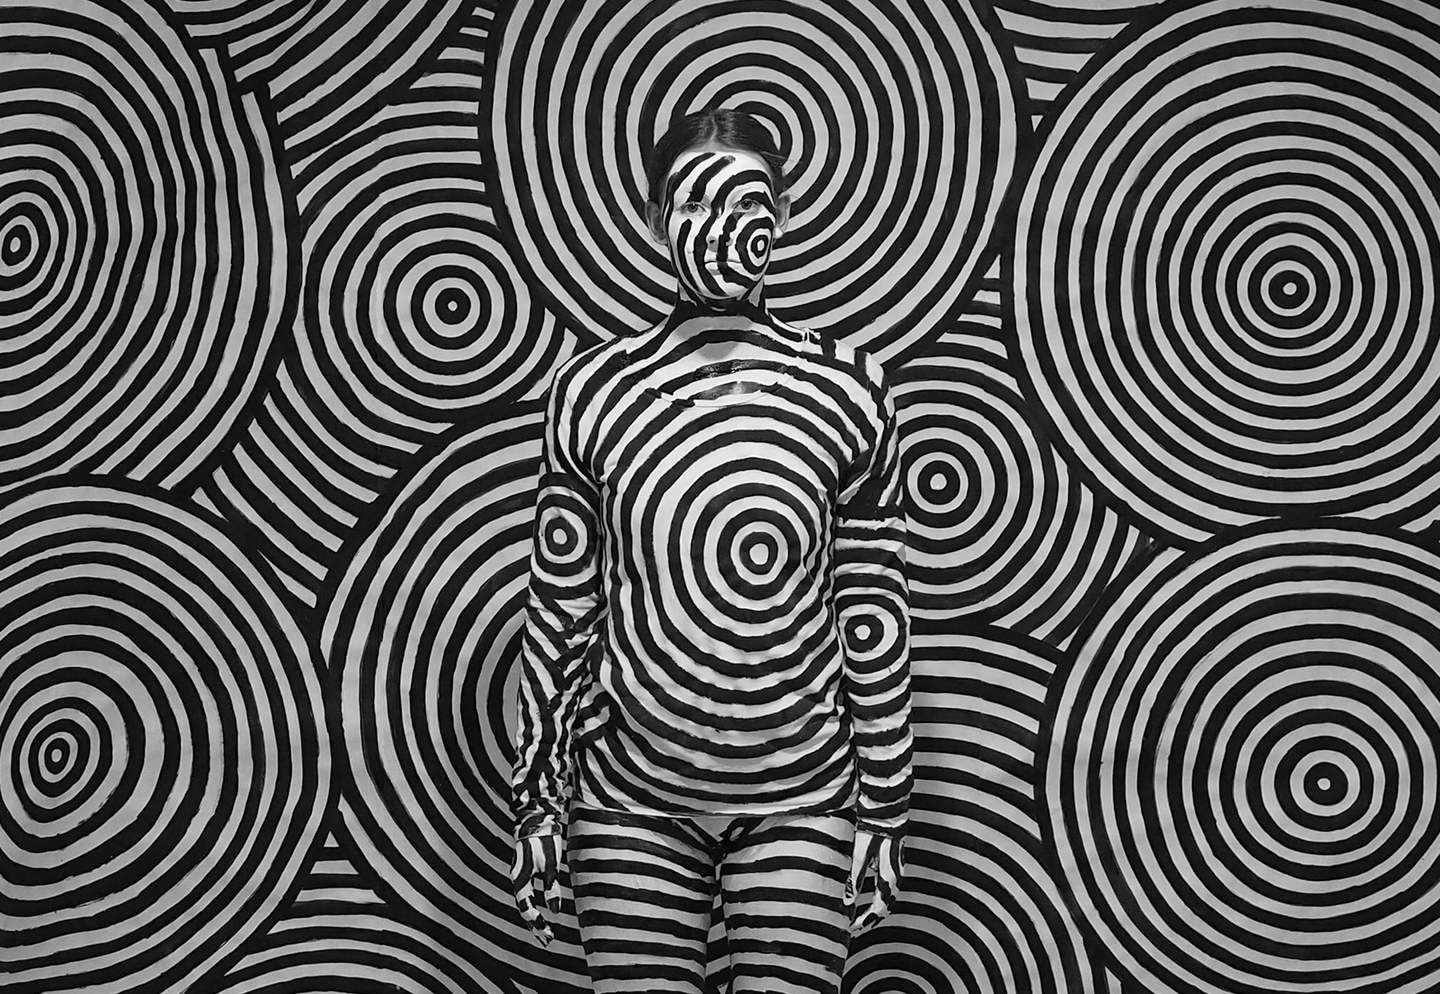 A young person is painted in black and white swirls camouflaged against the same patterned backdrop. 